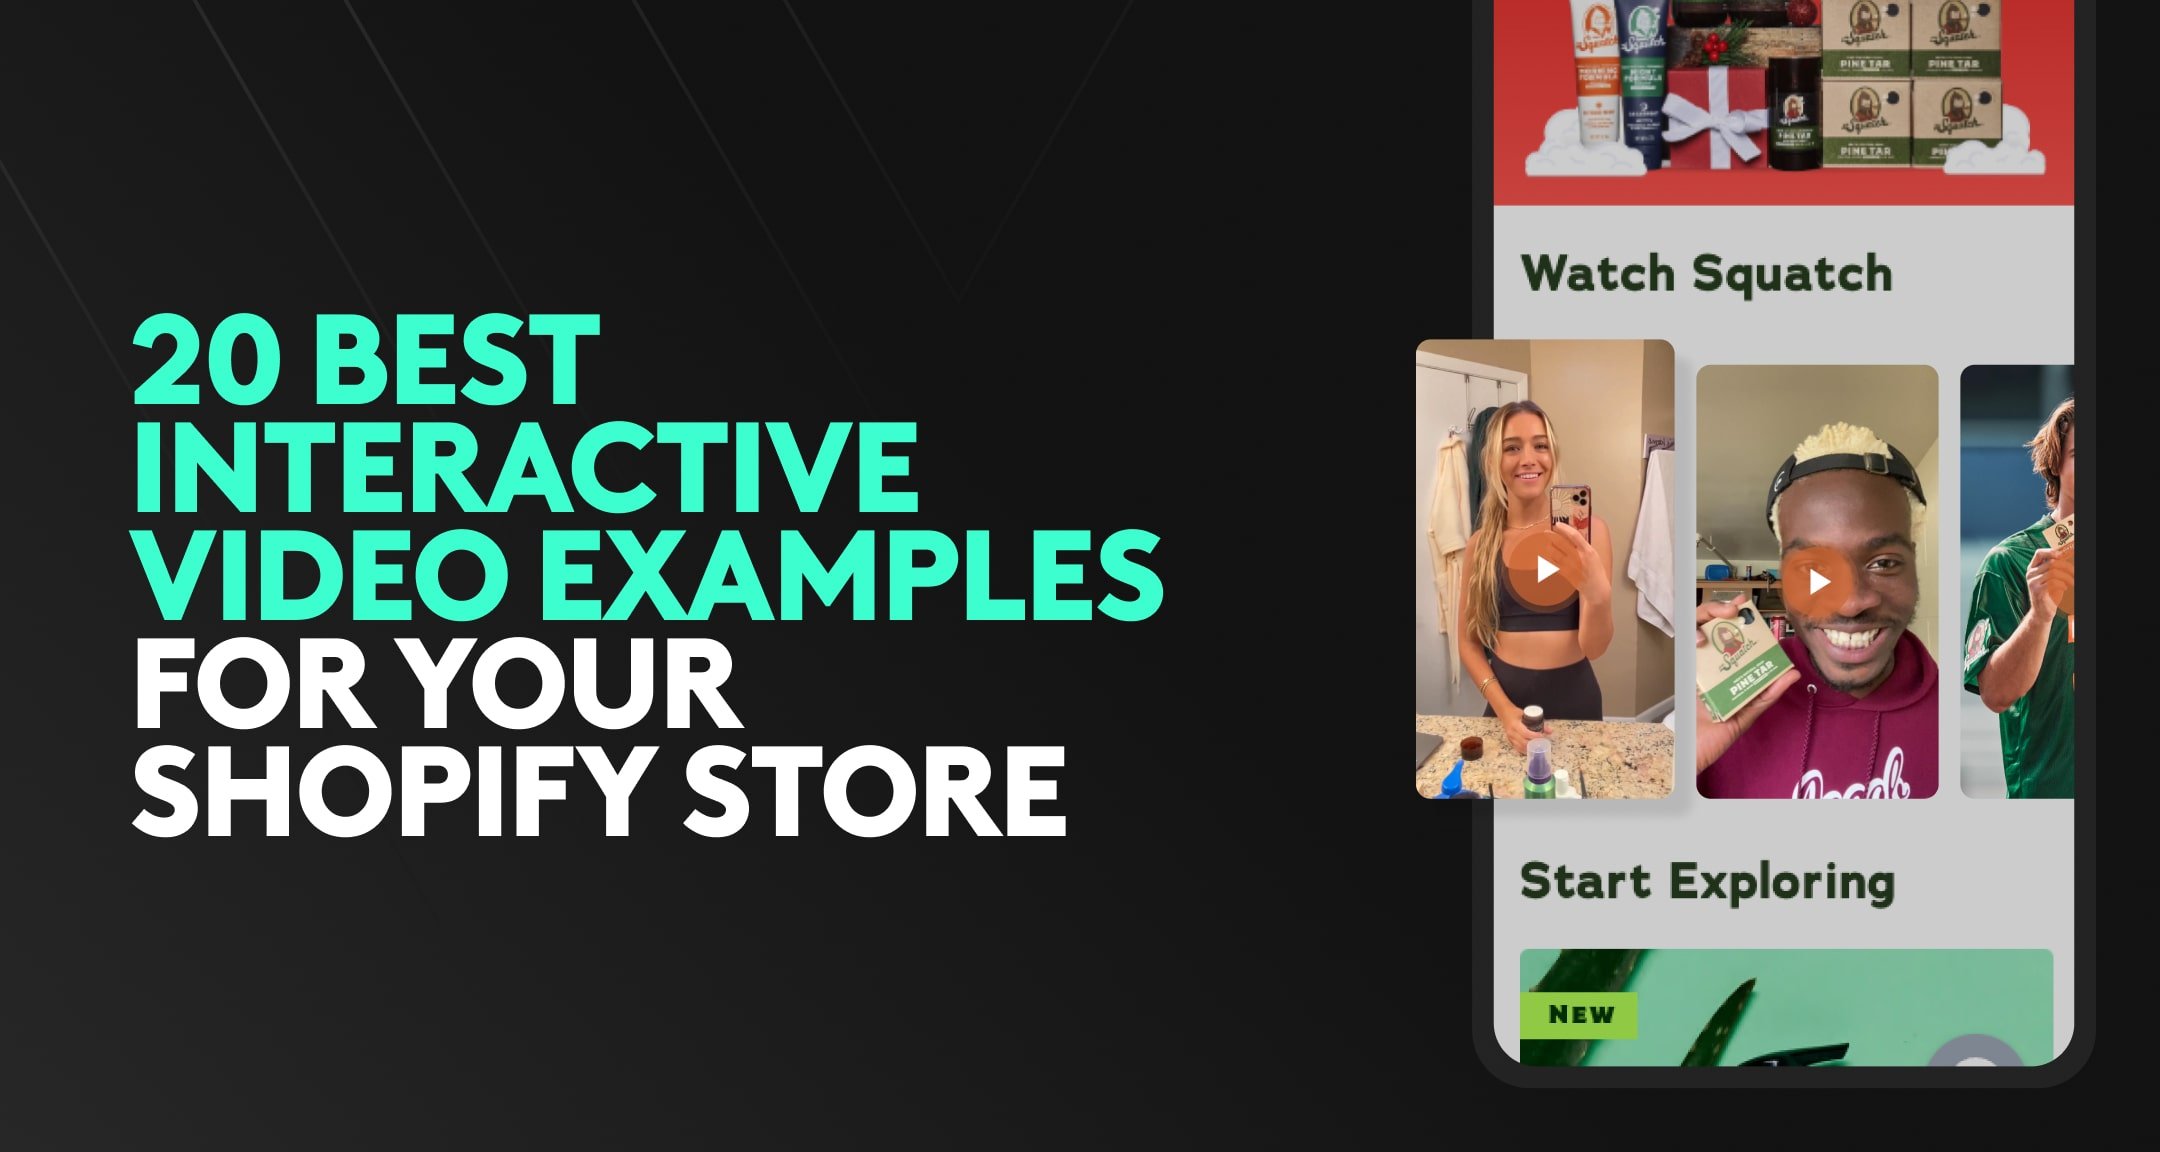 20 Best Interactive Video Examples for Your Shopify Store